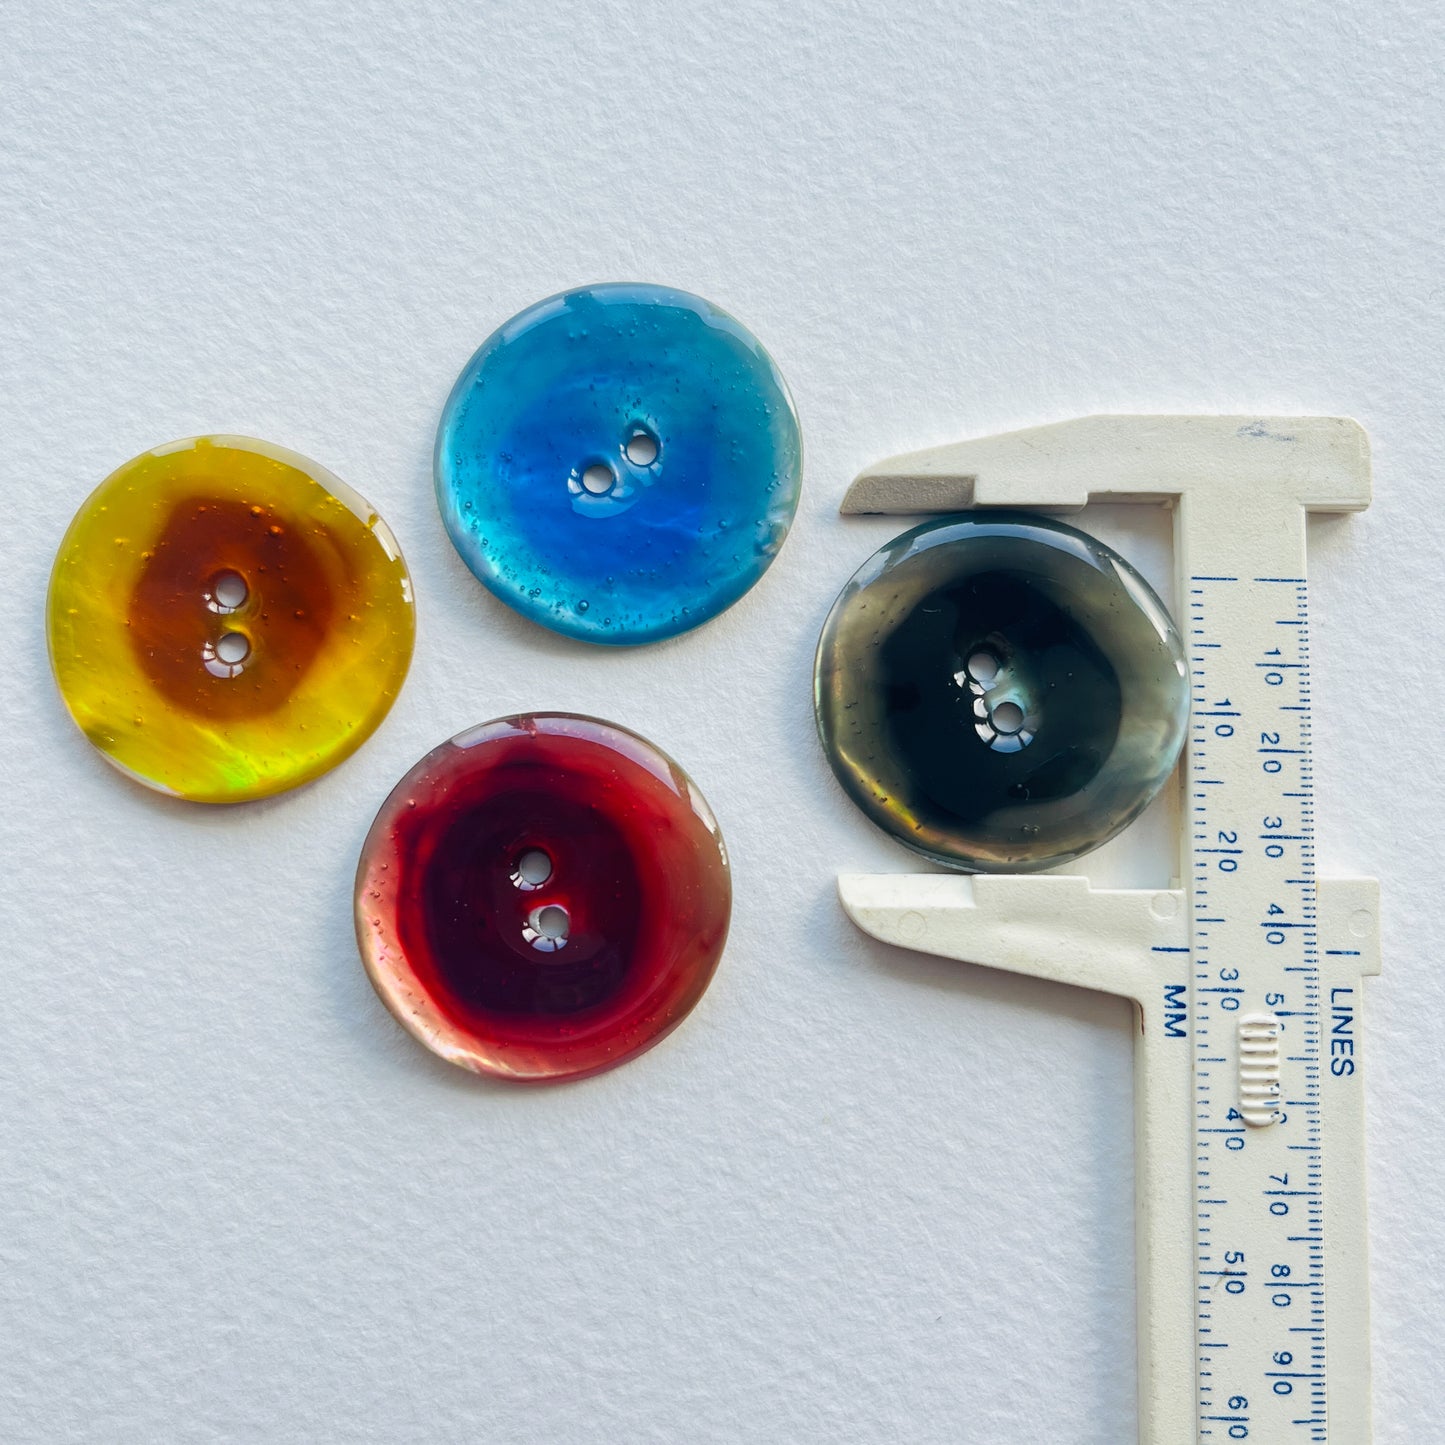 Colourful lacquered Agoya shell buttons - 28mm/44 ligne .Deadstock haberdashery. Choose our range of vintage buttons, trims & sewing accoutrement rescued from a London haberdasher. Sew sustainably.